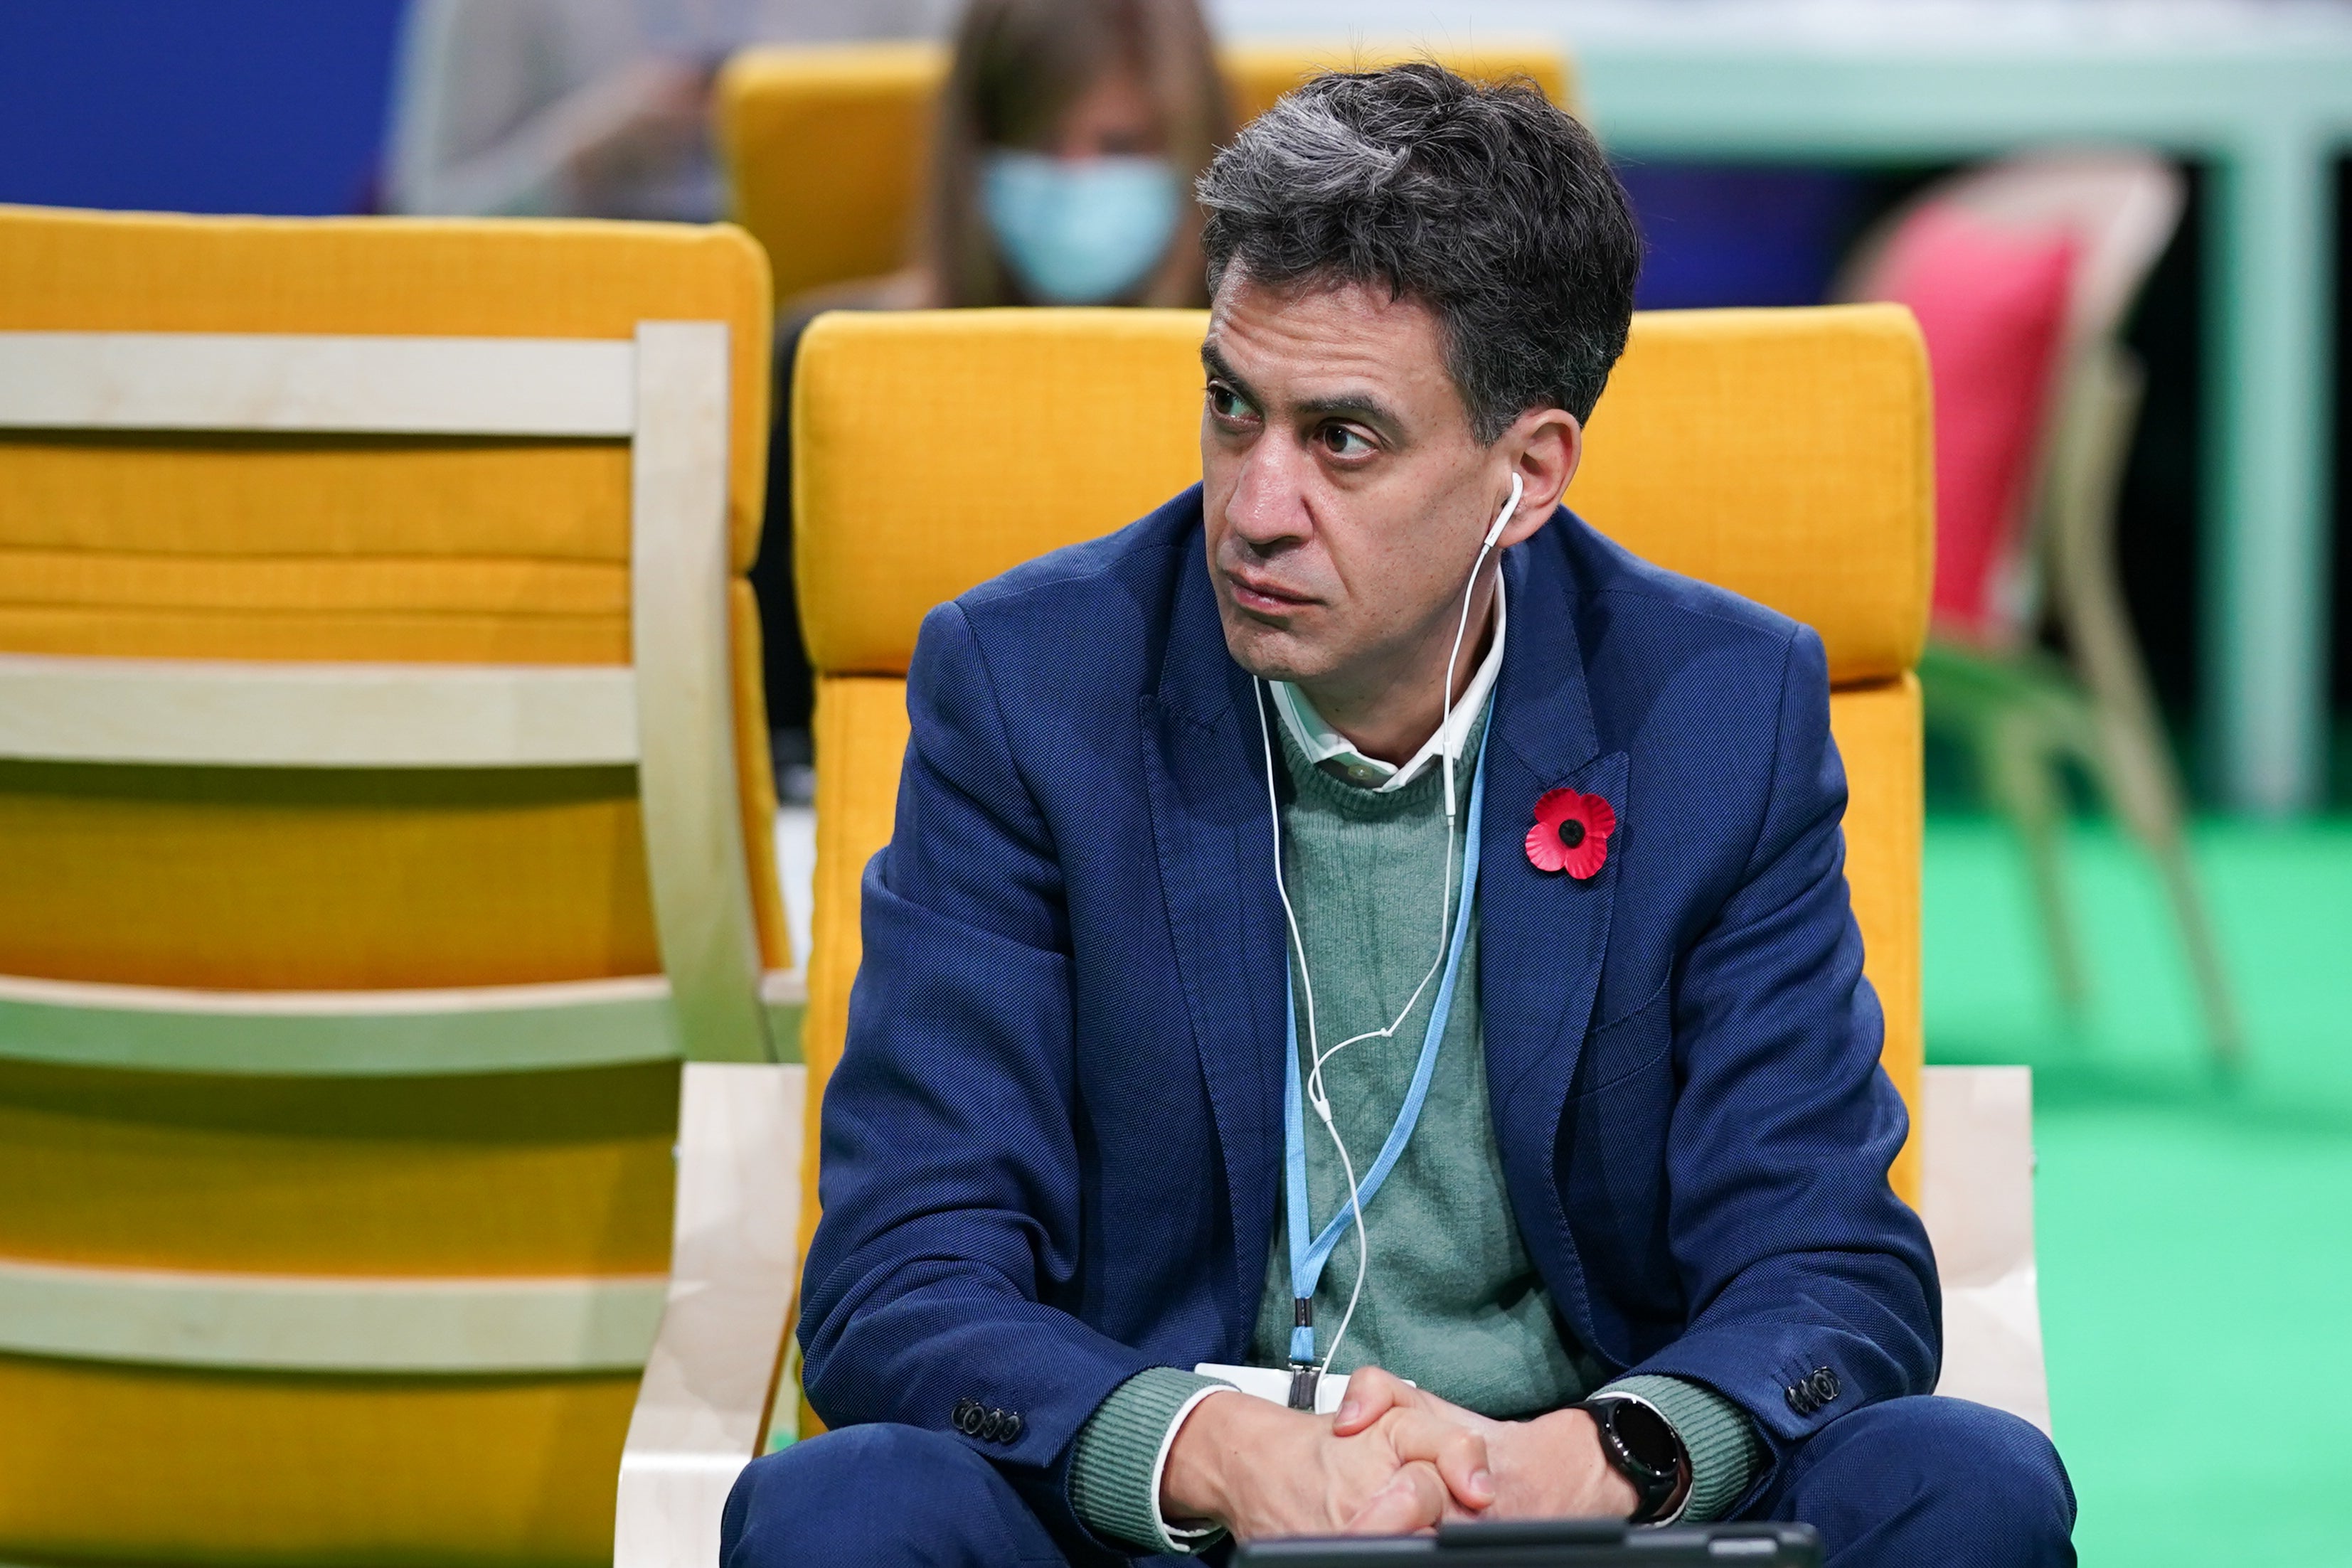 Shadow business secretary Ed Miliband on day three of the Cop26 climate summit in Glasgow